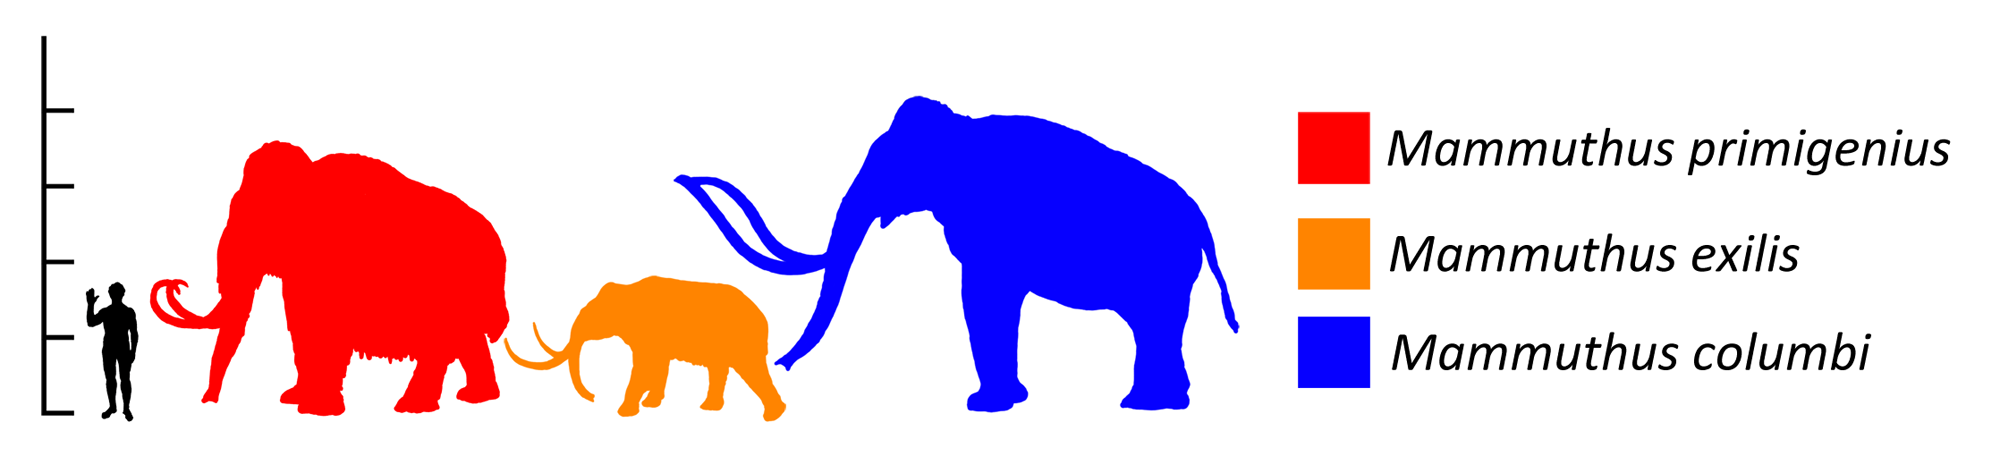 Diagram showing the relative sizes of the three species of mammoth that are found in the Pleistocene of North America. From largest to smallest they are the Columbian mammoth, the woolly mammoth, and the pygmy mammoth.